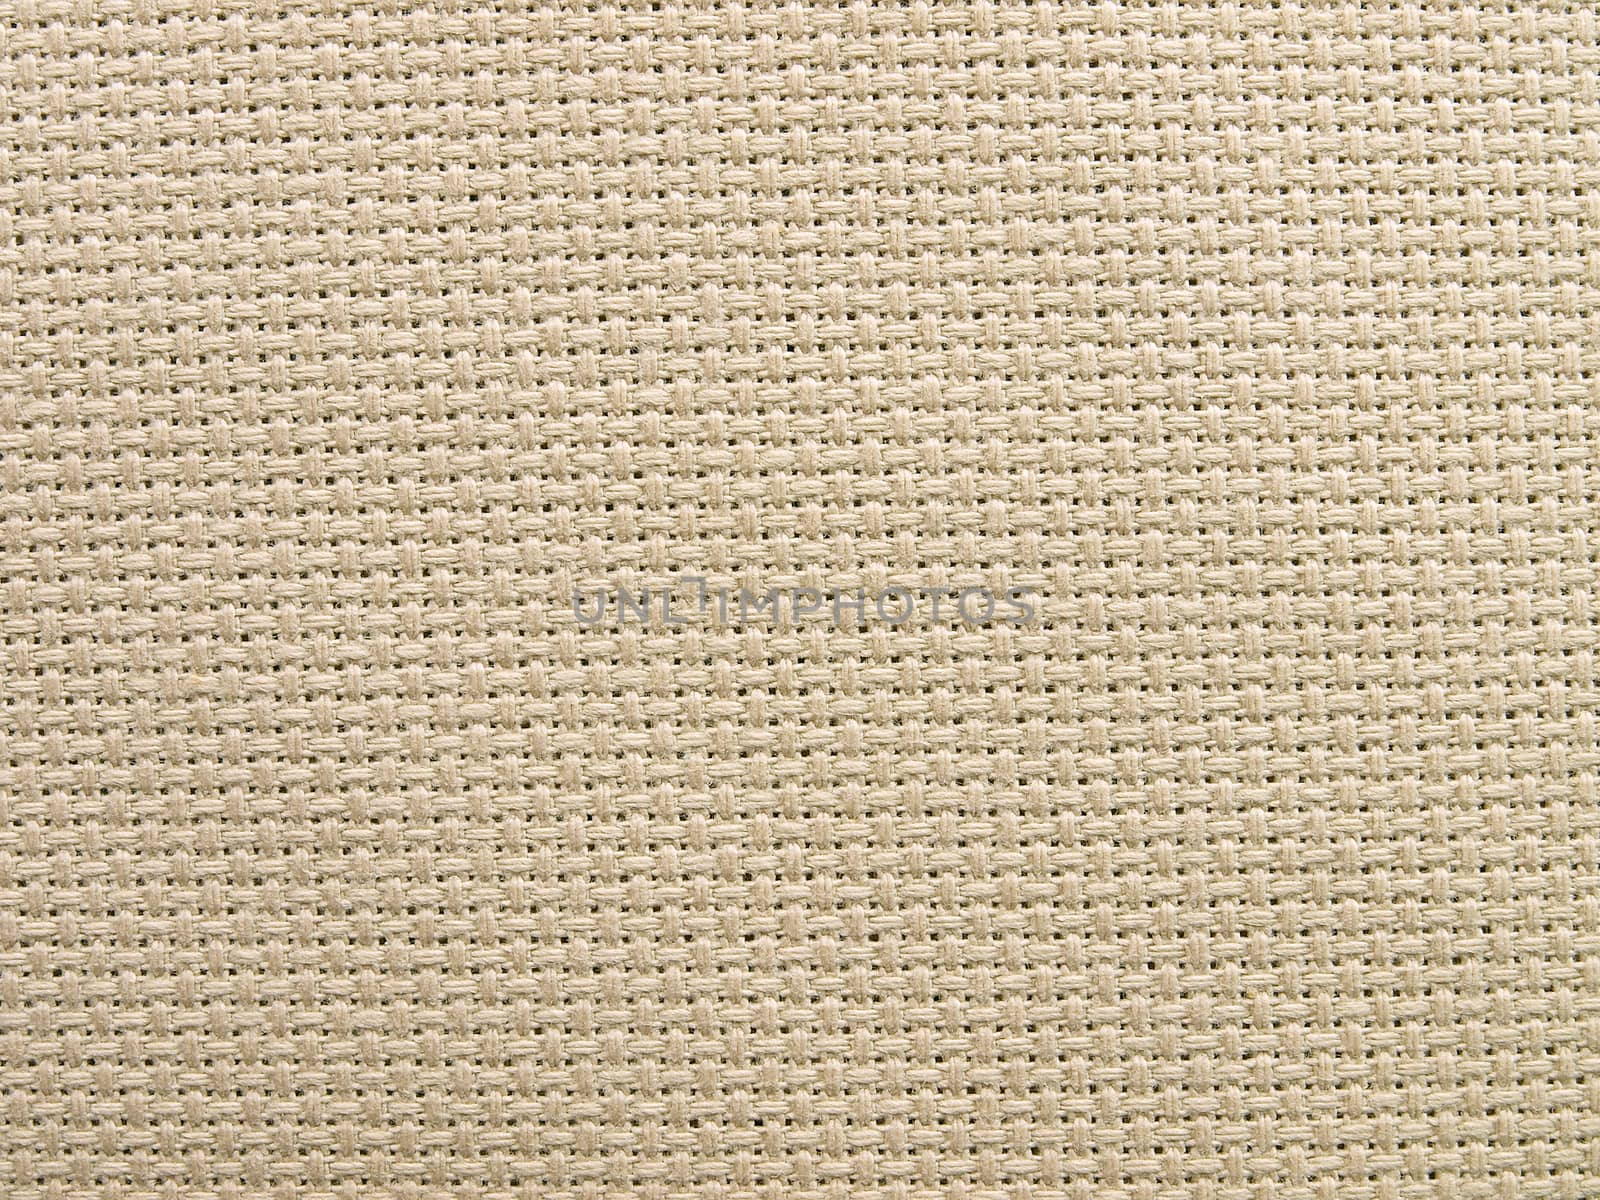 High resolution image of linen background material. High scale.